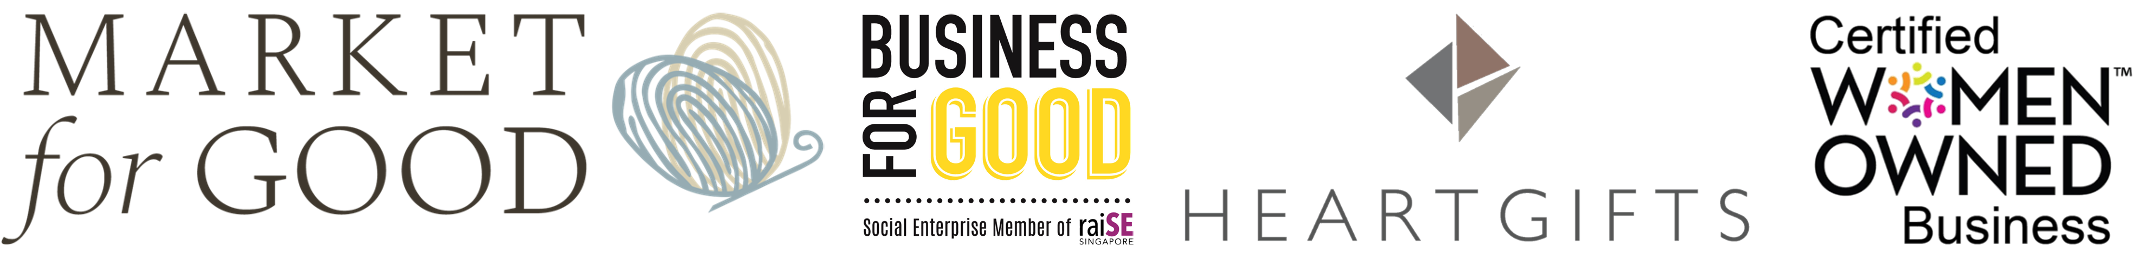 Market for Good, Business for Good, Heartgifts, Women Owned